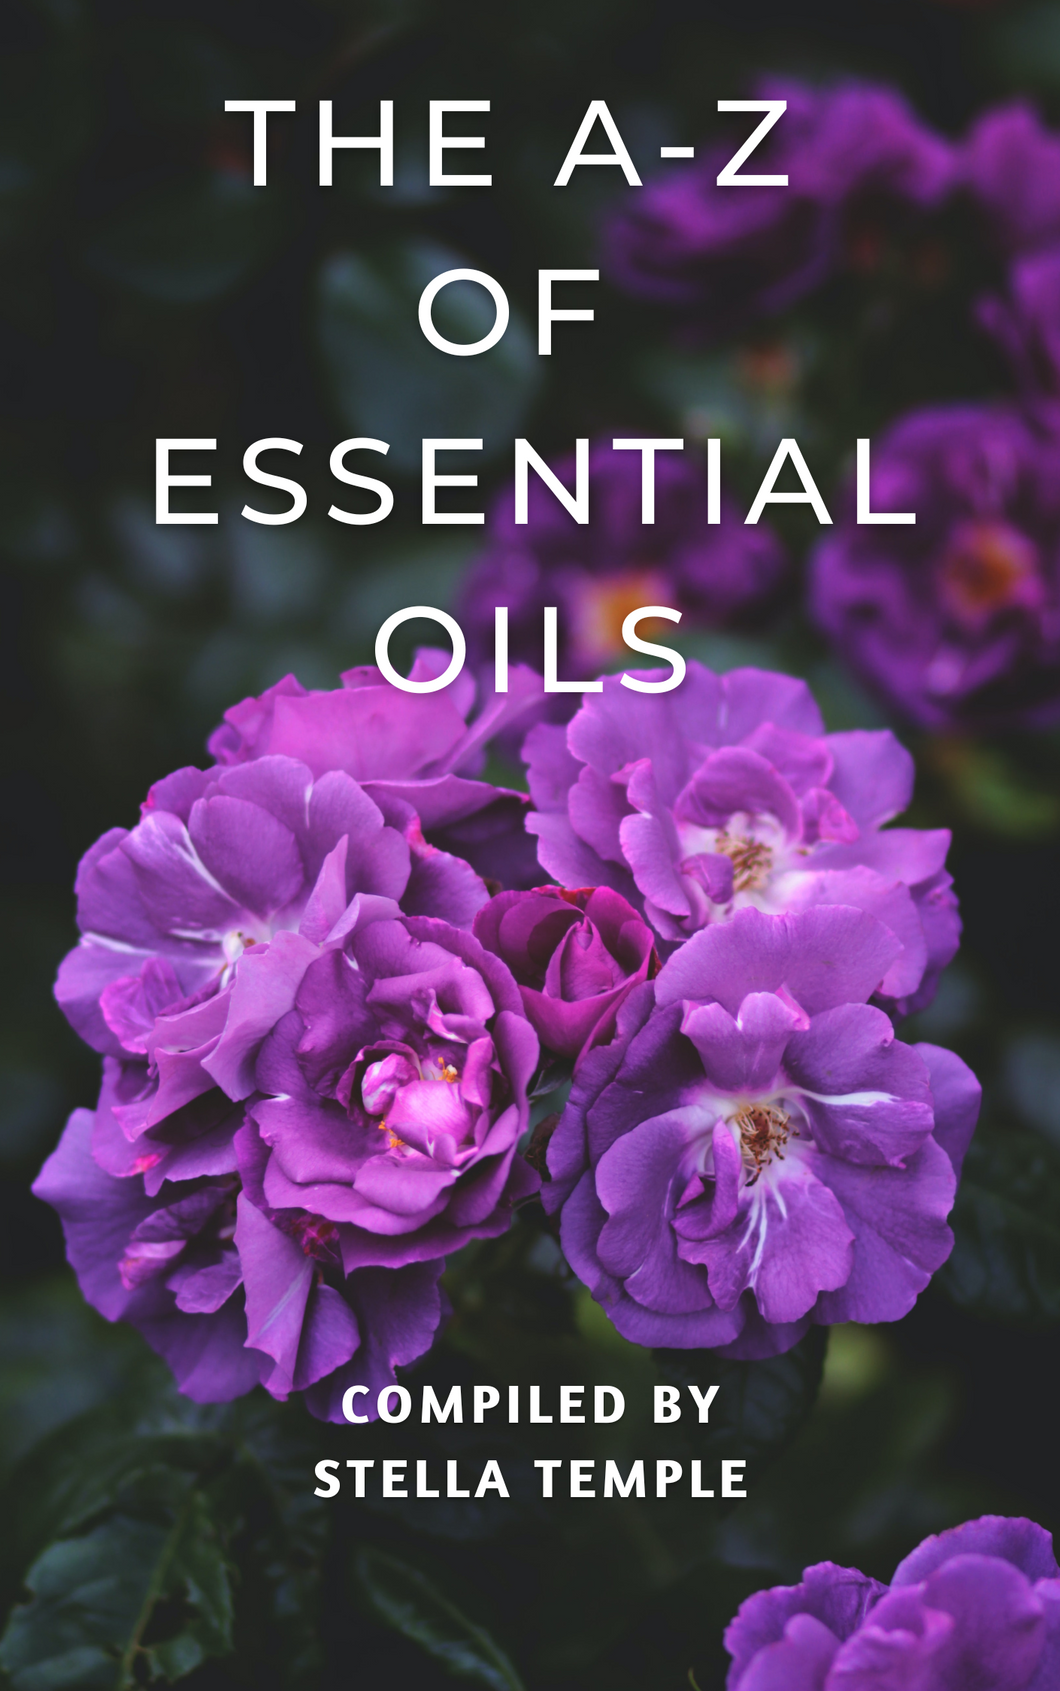 The A - Z of Essential Oils by Stella Temple